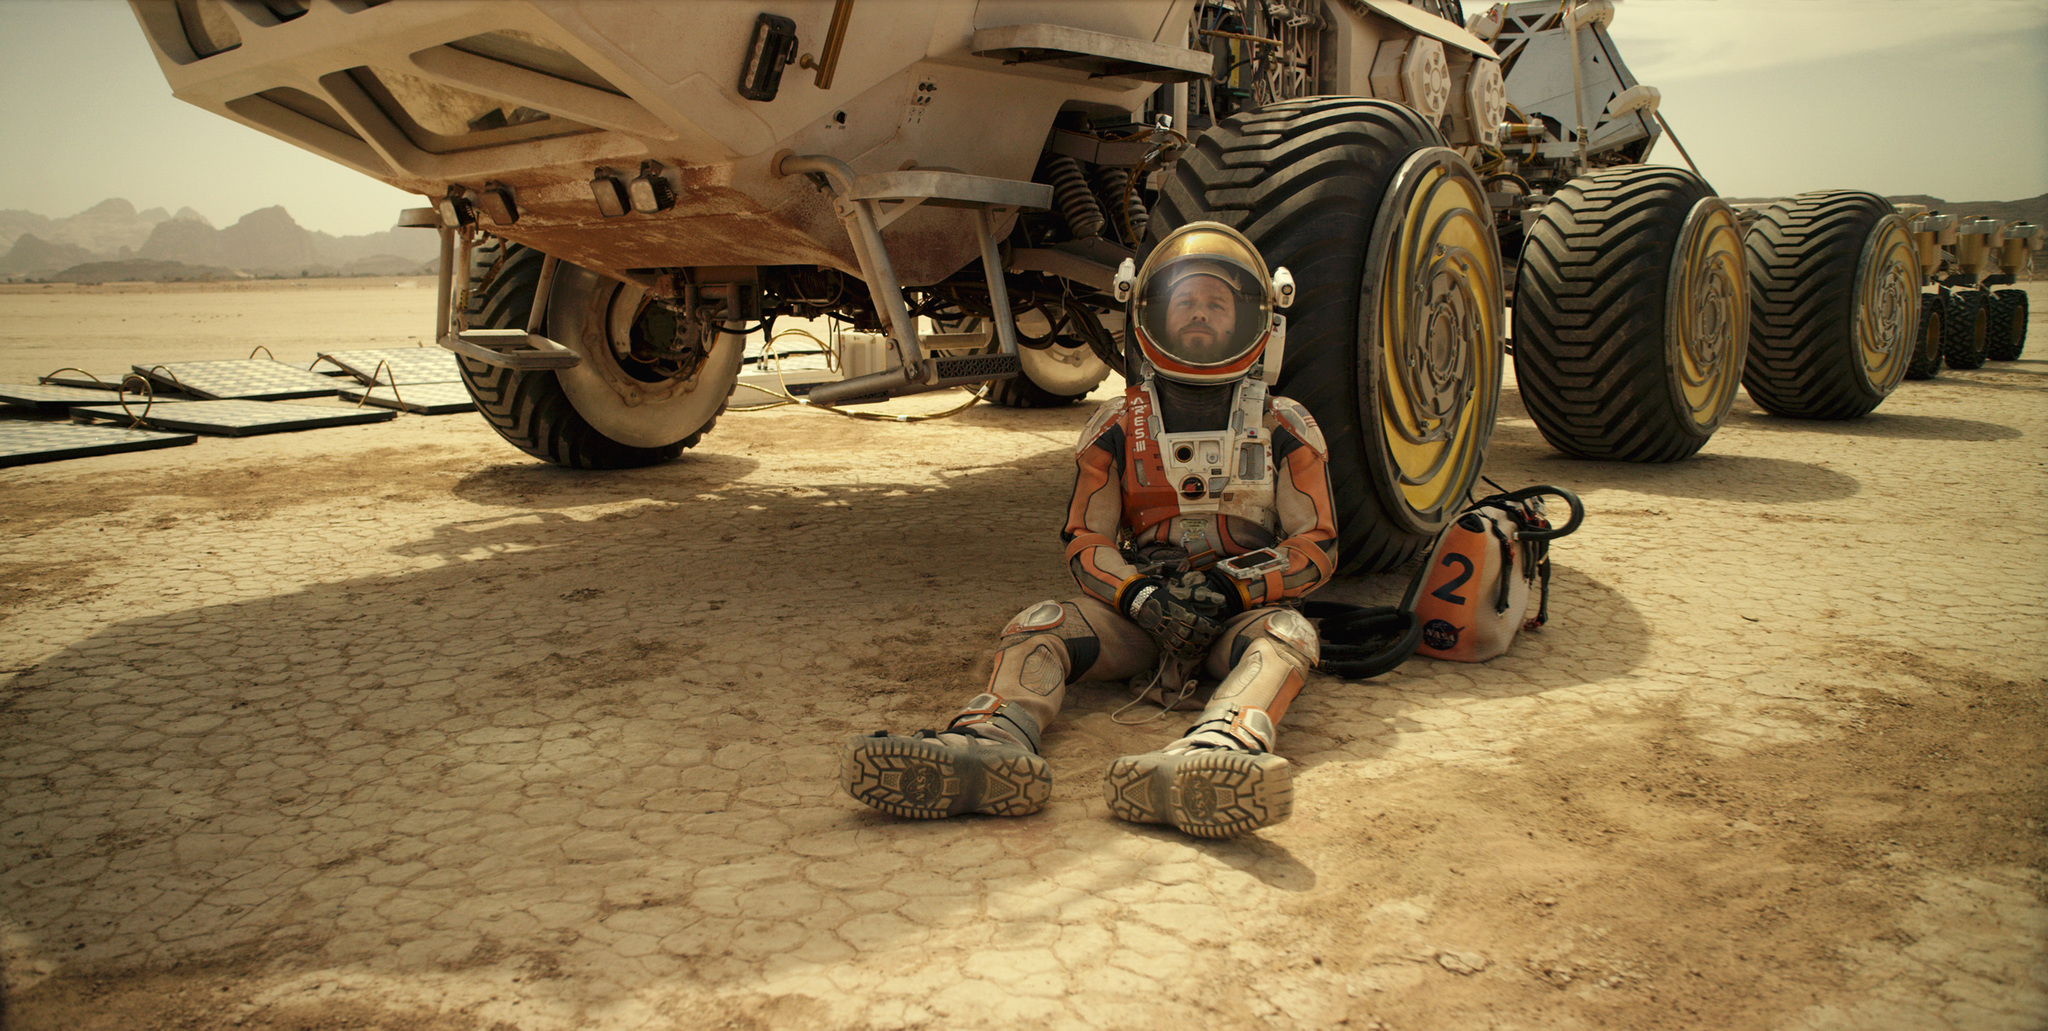 Read more about the article ‘The Martian’ review: ‘Cast Away’ meets ‘Apollo 13’ on Mars, but funnier